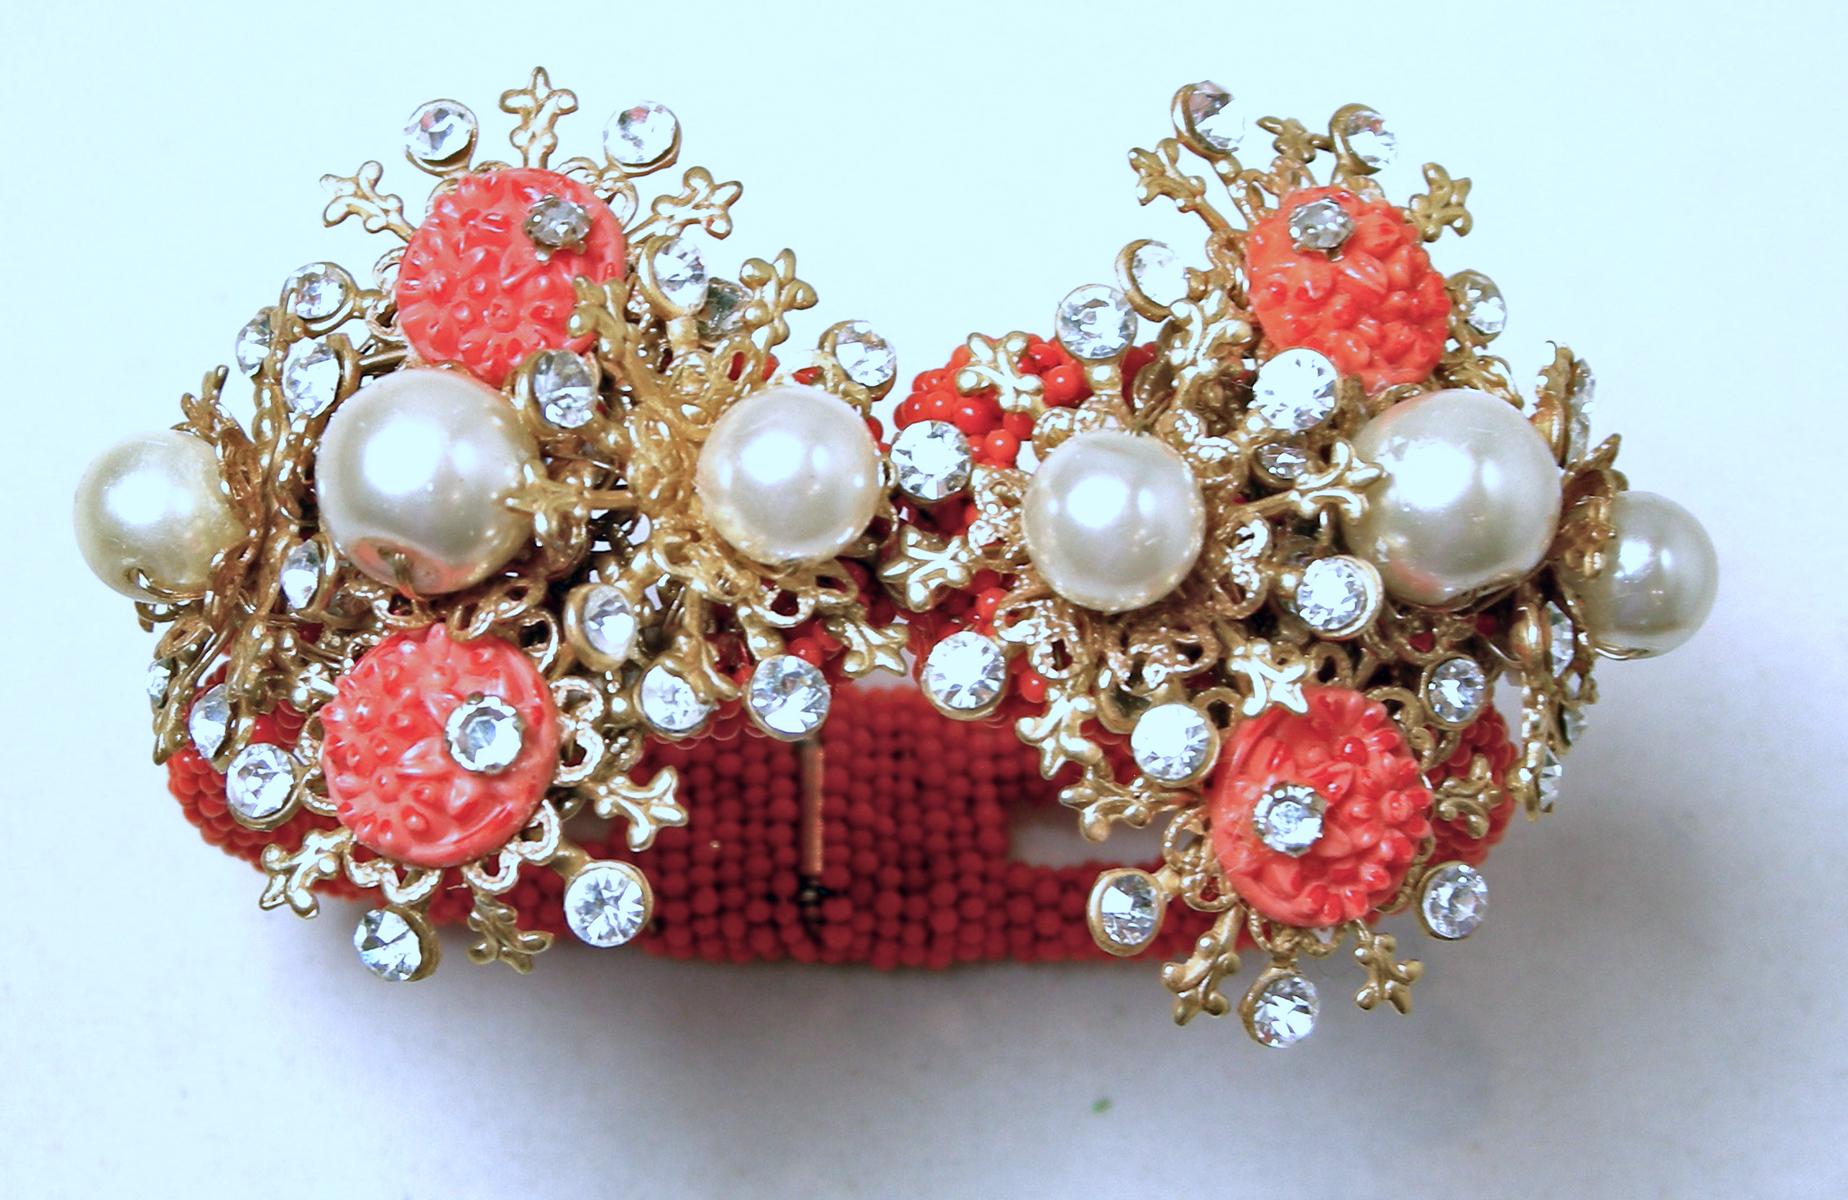 This vintage 1950s bracelet features faux coral beads with faux pearl with crystal accents in a gold tone setting.  In excellent condition, this clamper bracelet measures 6-1/2” around the inside x 1-3/4” wide at the front.